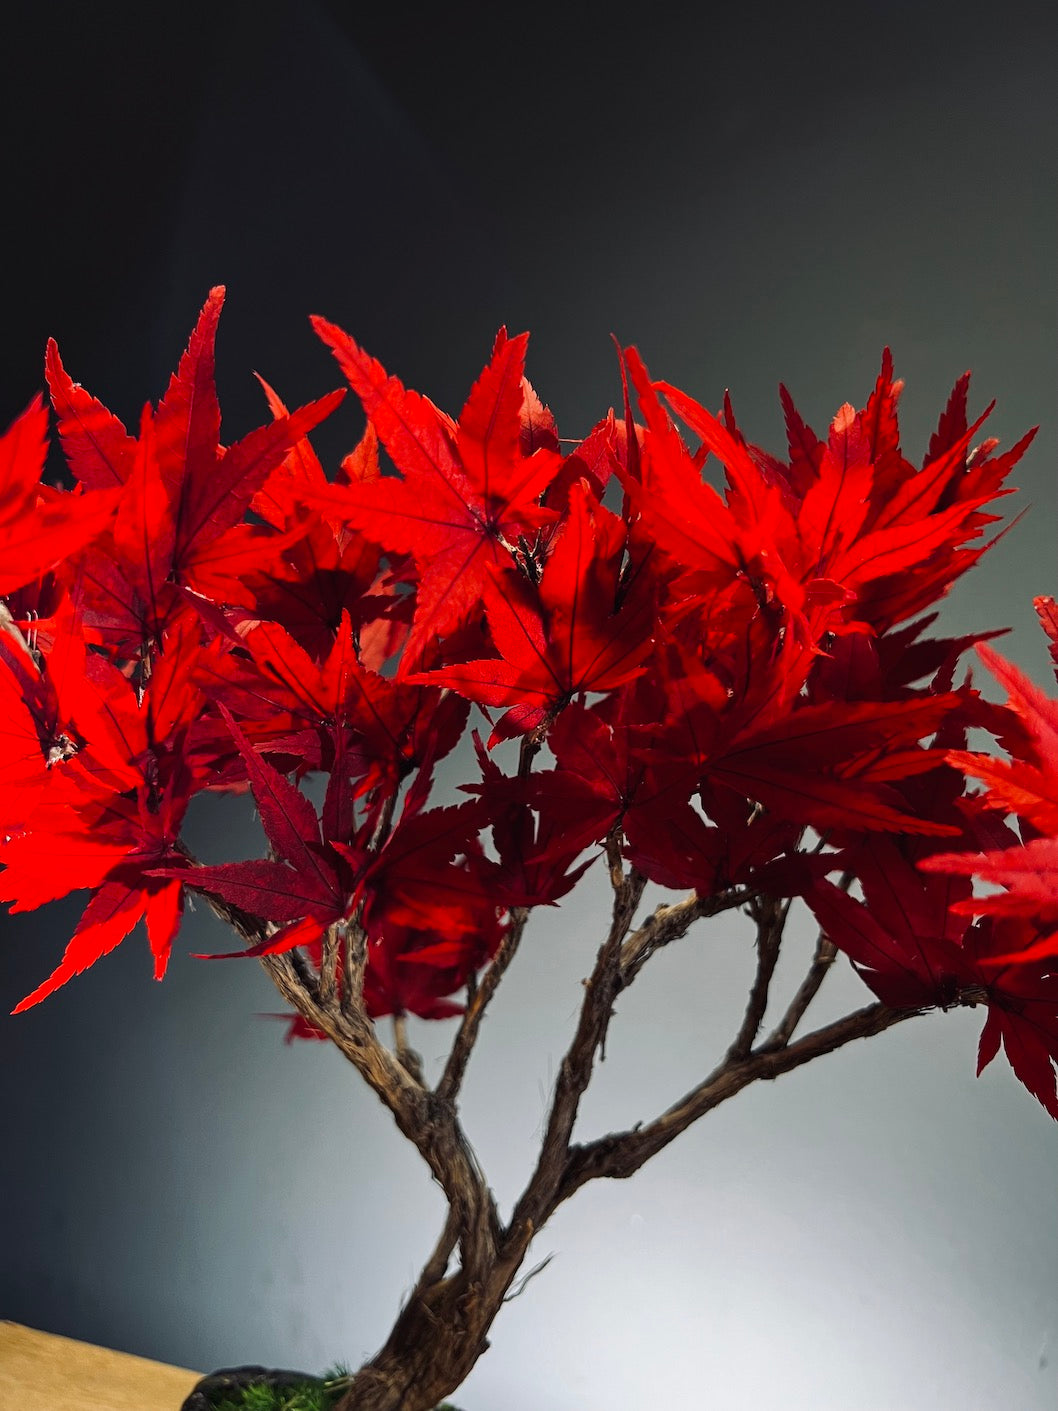 Theatre of Autumn - Flaming Maple - Smaller version (Preserved Plants)